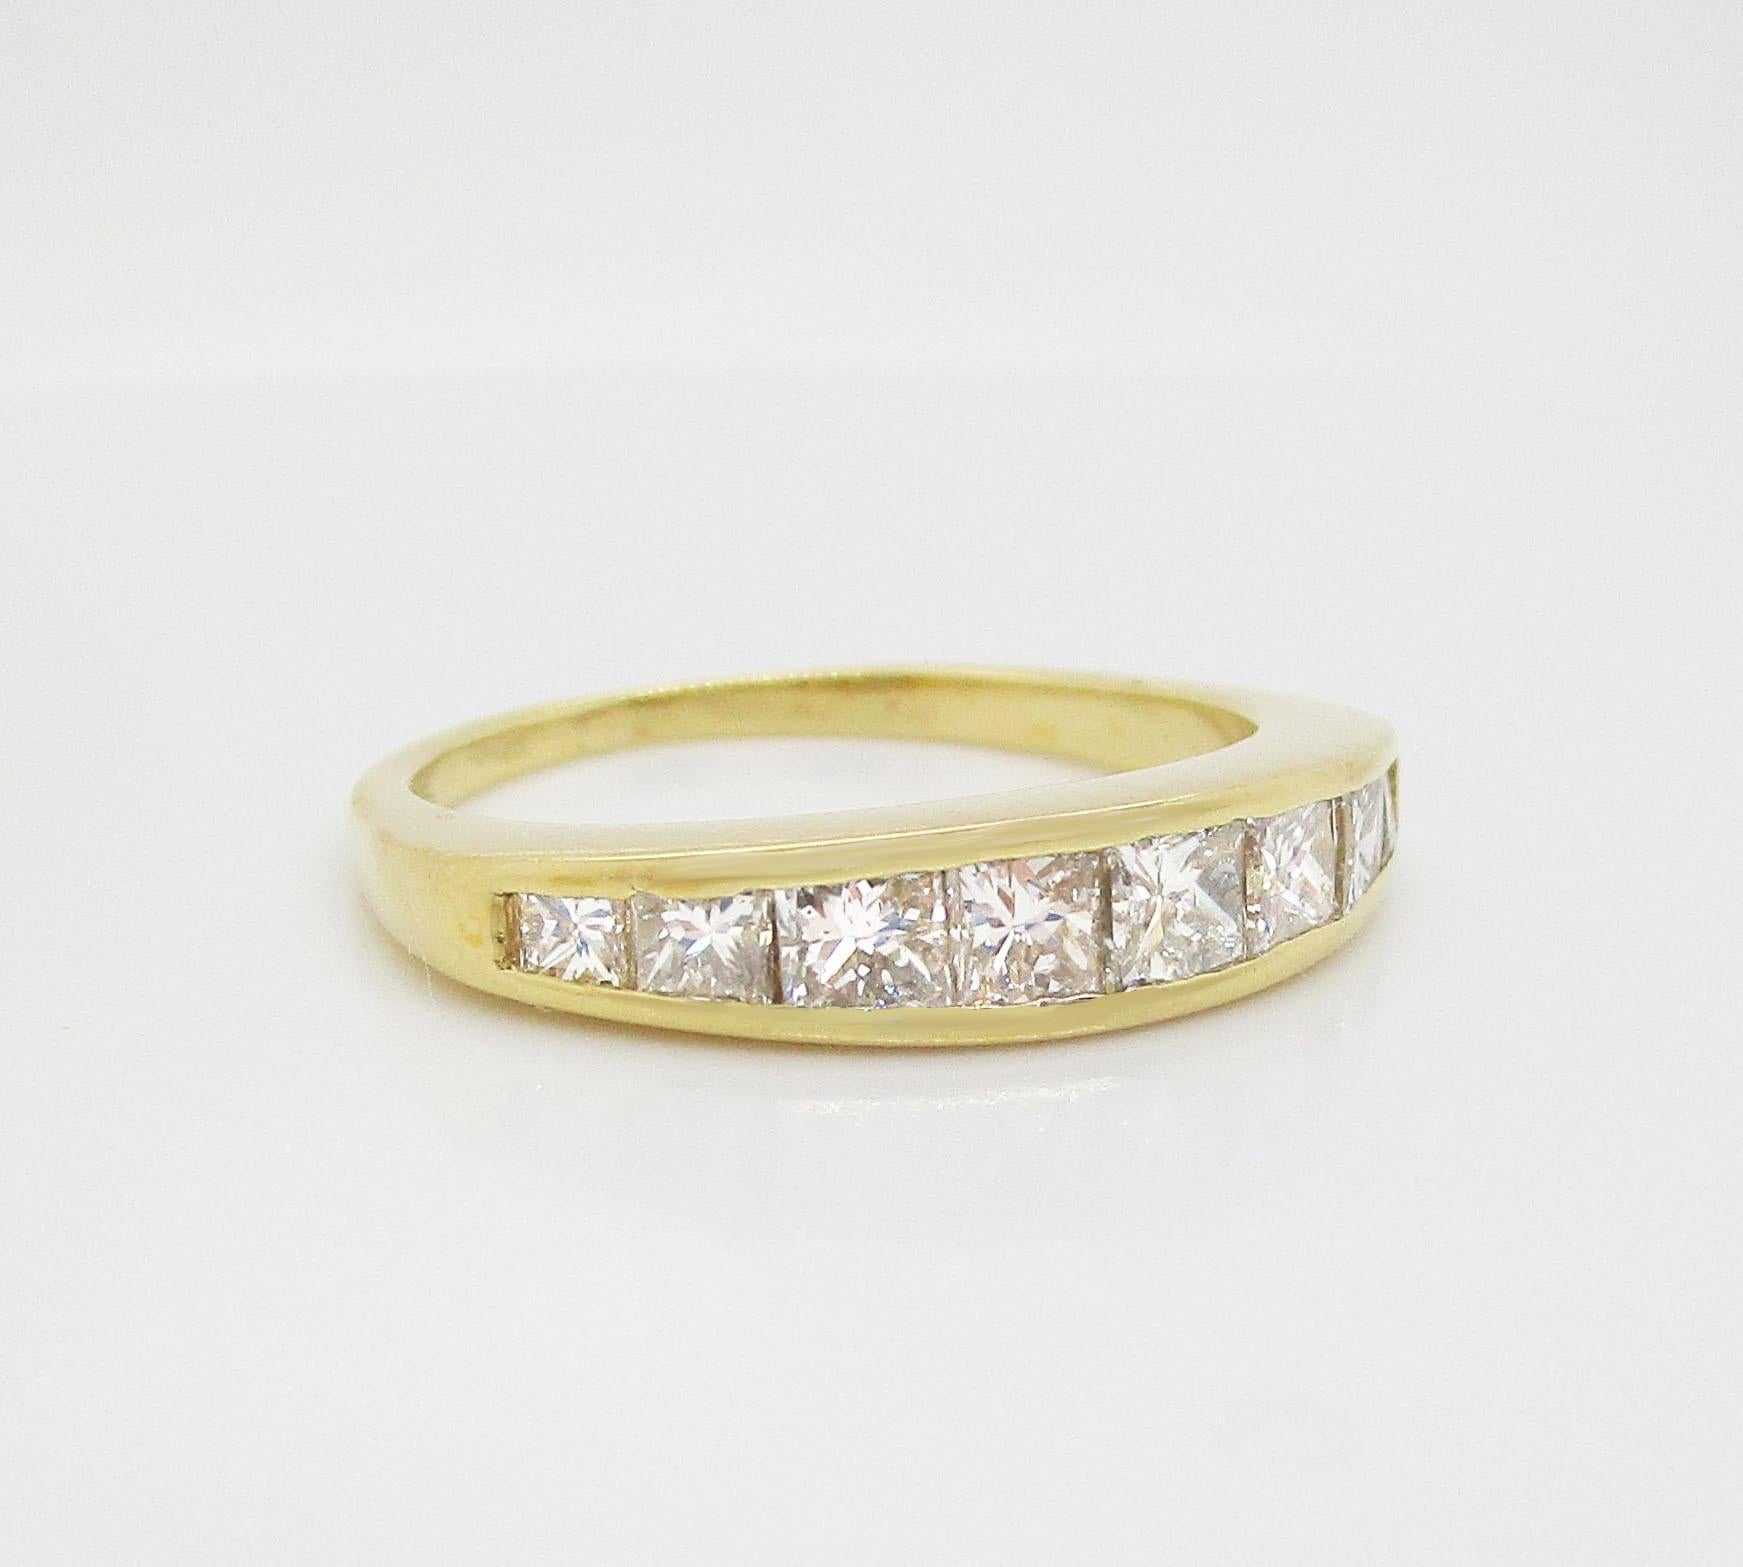 This is a gorgeous band ring in 18k yellow gold with a stunning array of channel set princess cut diamonds! The diamonds are arranged in a graduated layout that fits perfectly against the curve of the hand. This band would make the perfect stacking